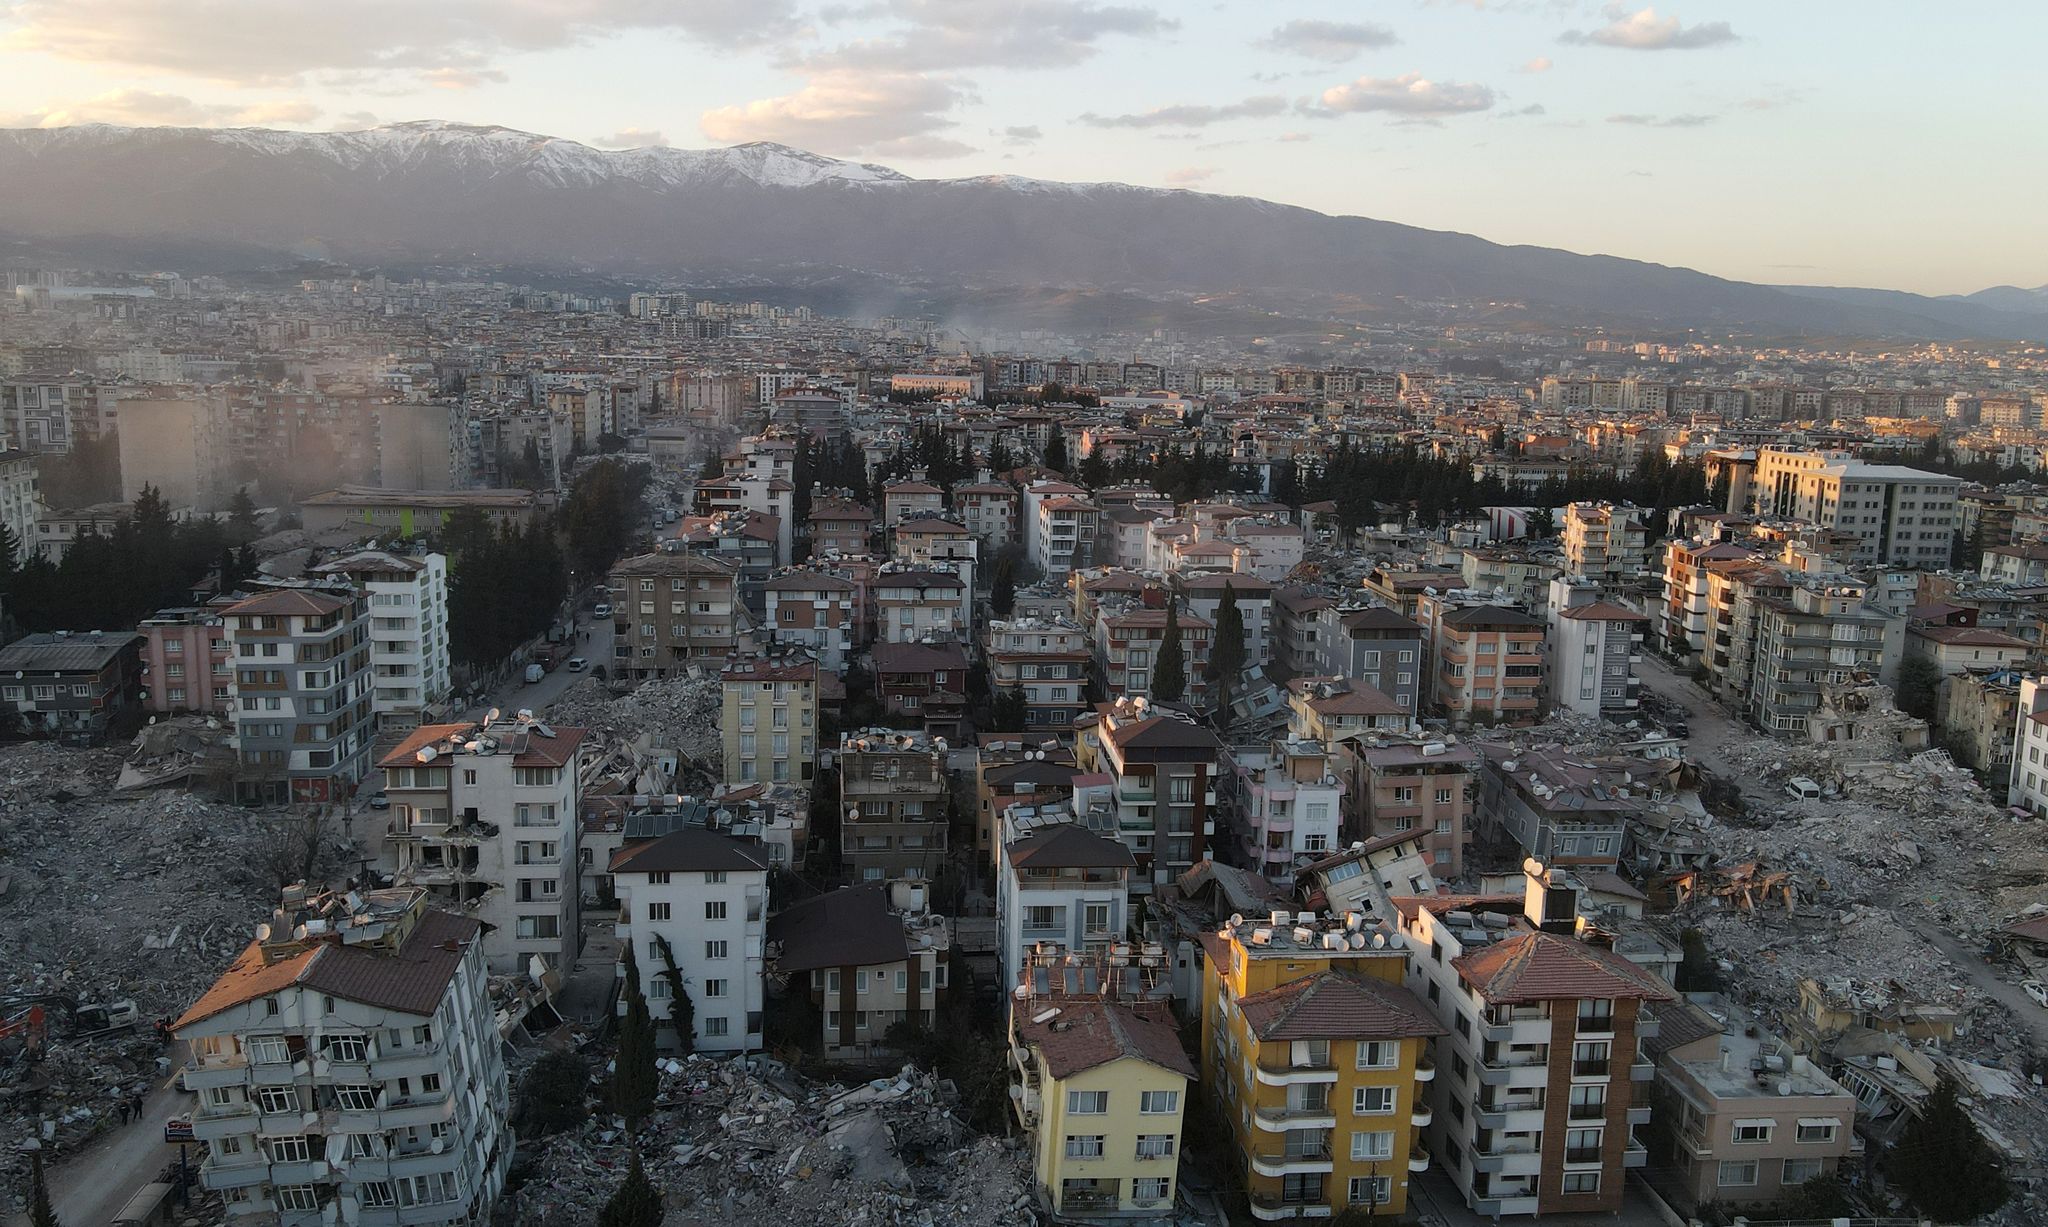 aftermath of the earthquakes in hatay